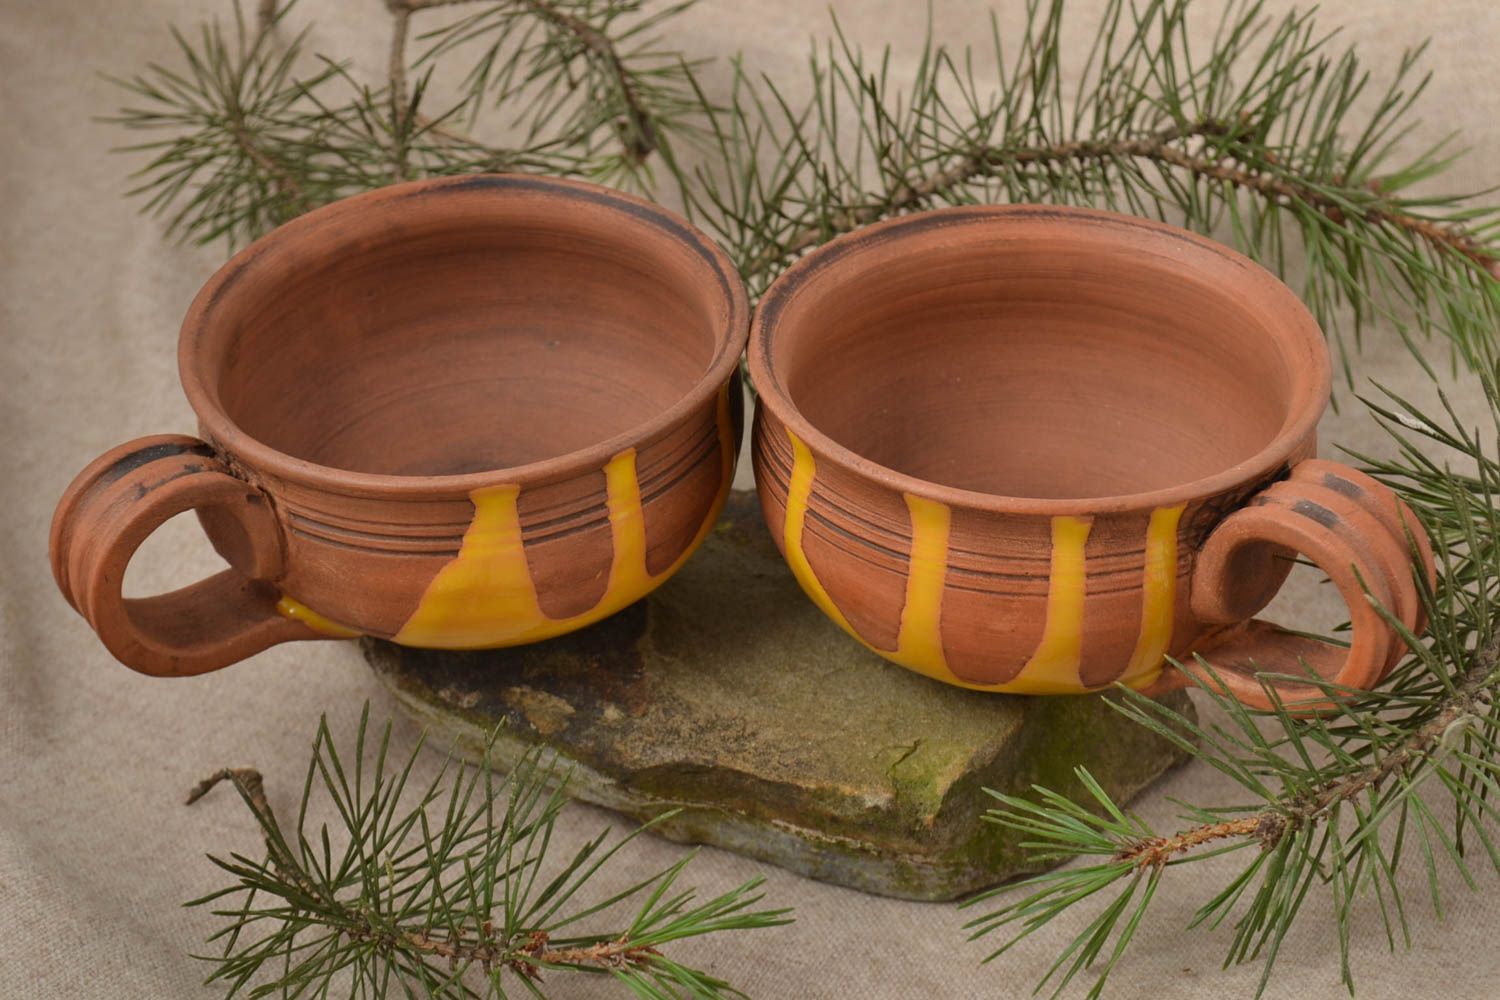 Clay 2 two cups set with handles, no saucers, no pattern photo 1